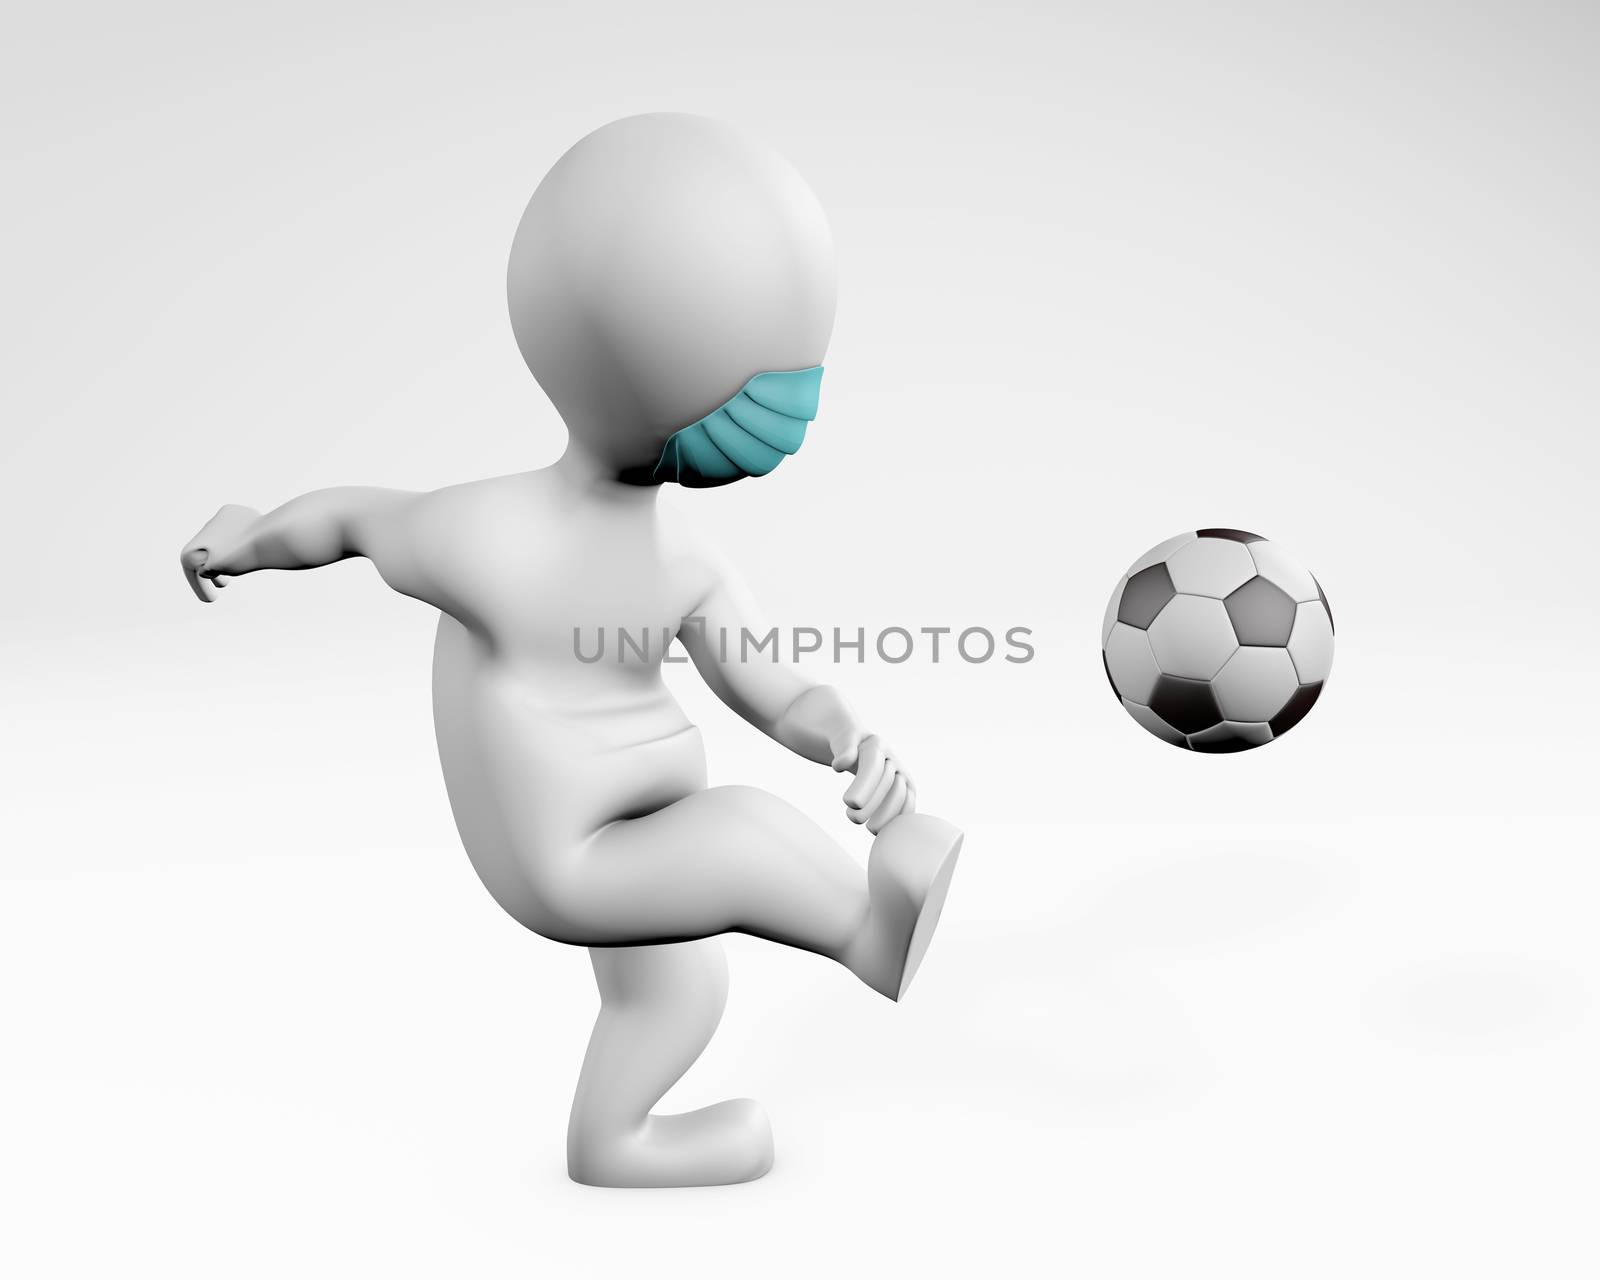 Fatty man with a mask playing soccer football 3d rendering isolated on white 